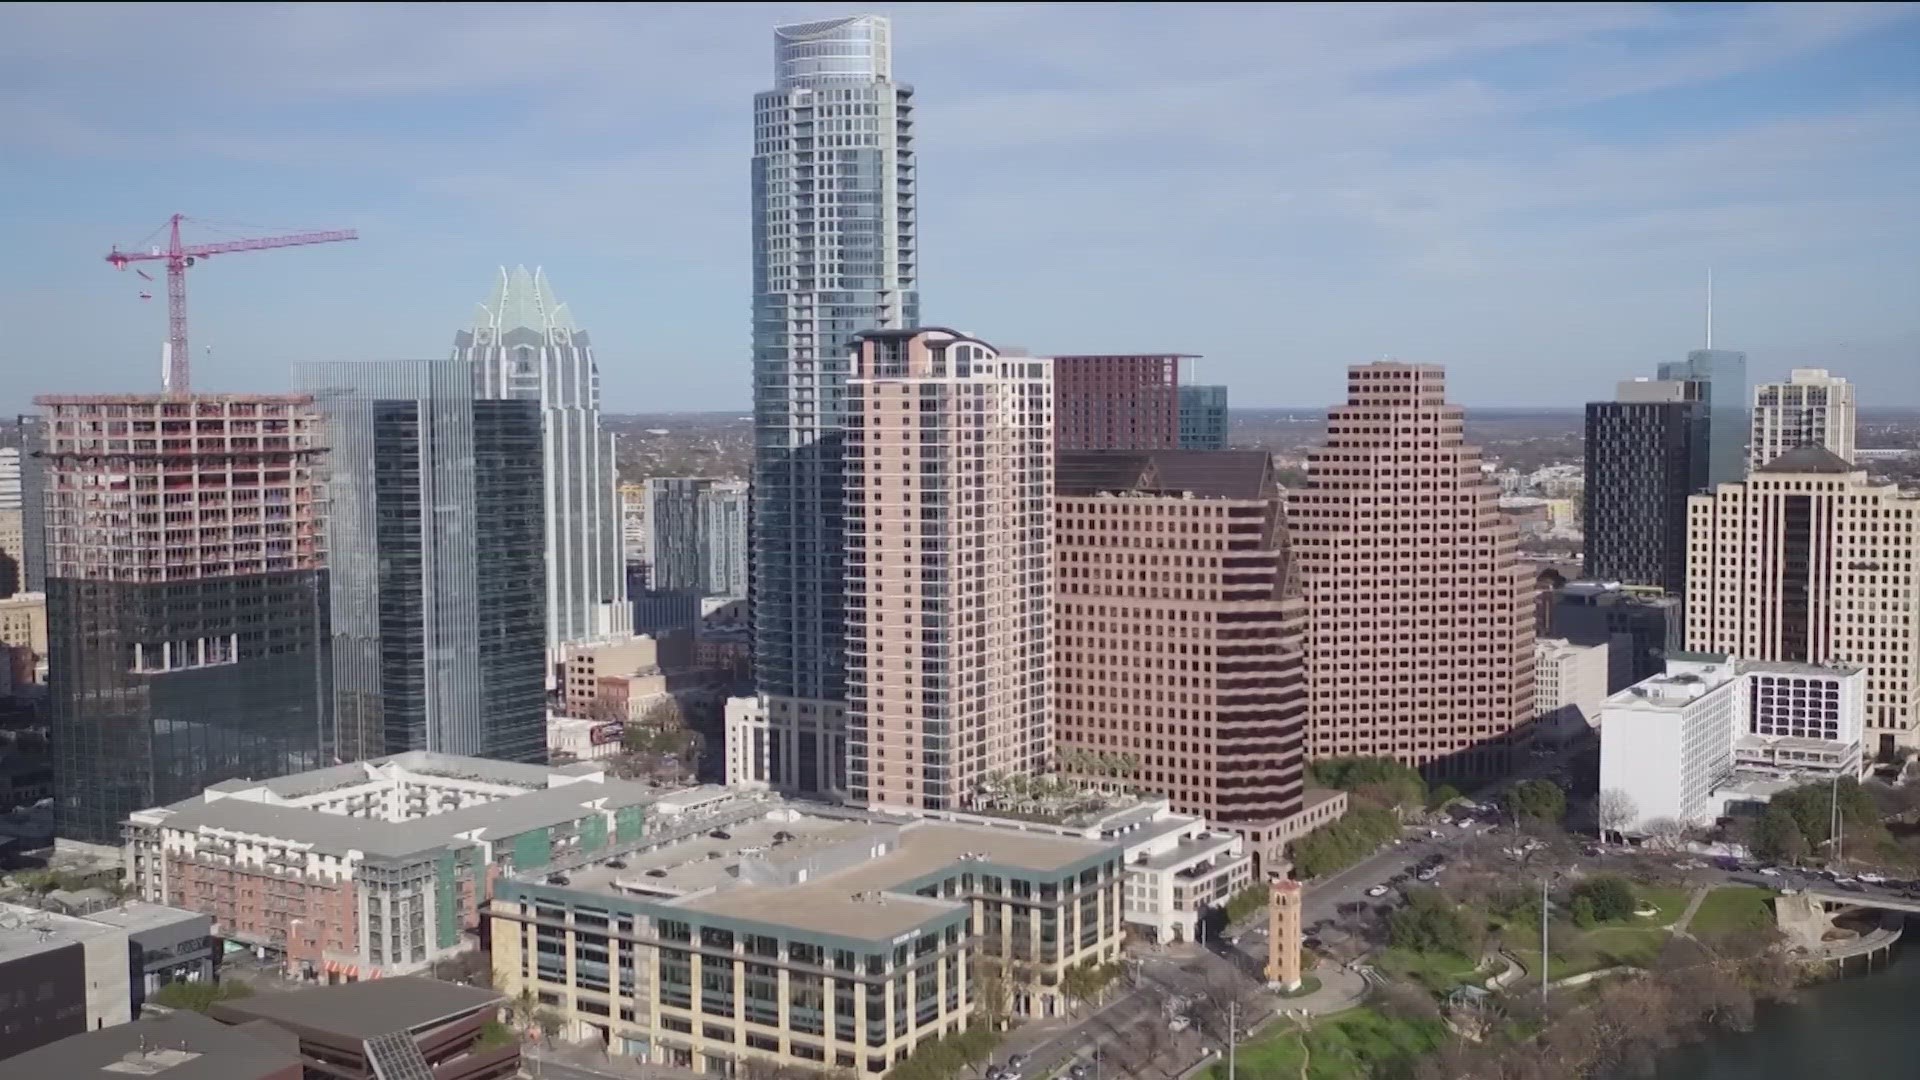 Austin, Texas, rent continues to rise, new report shows